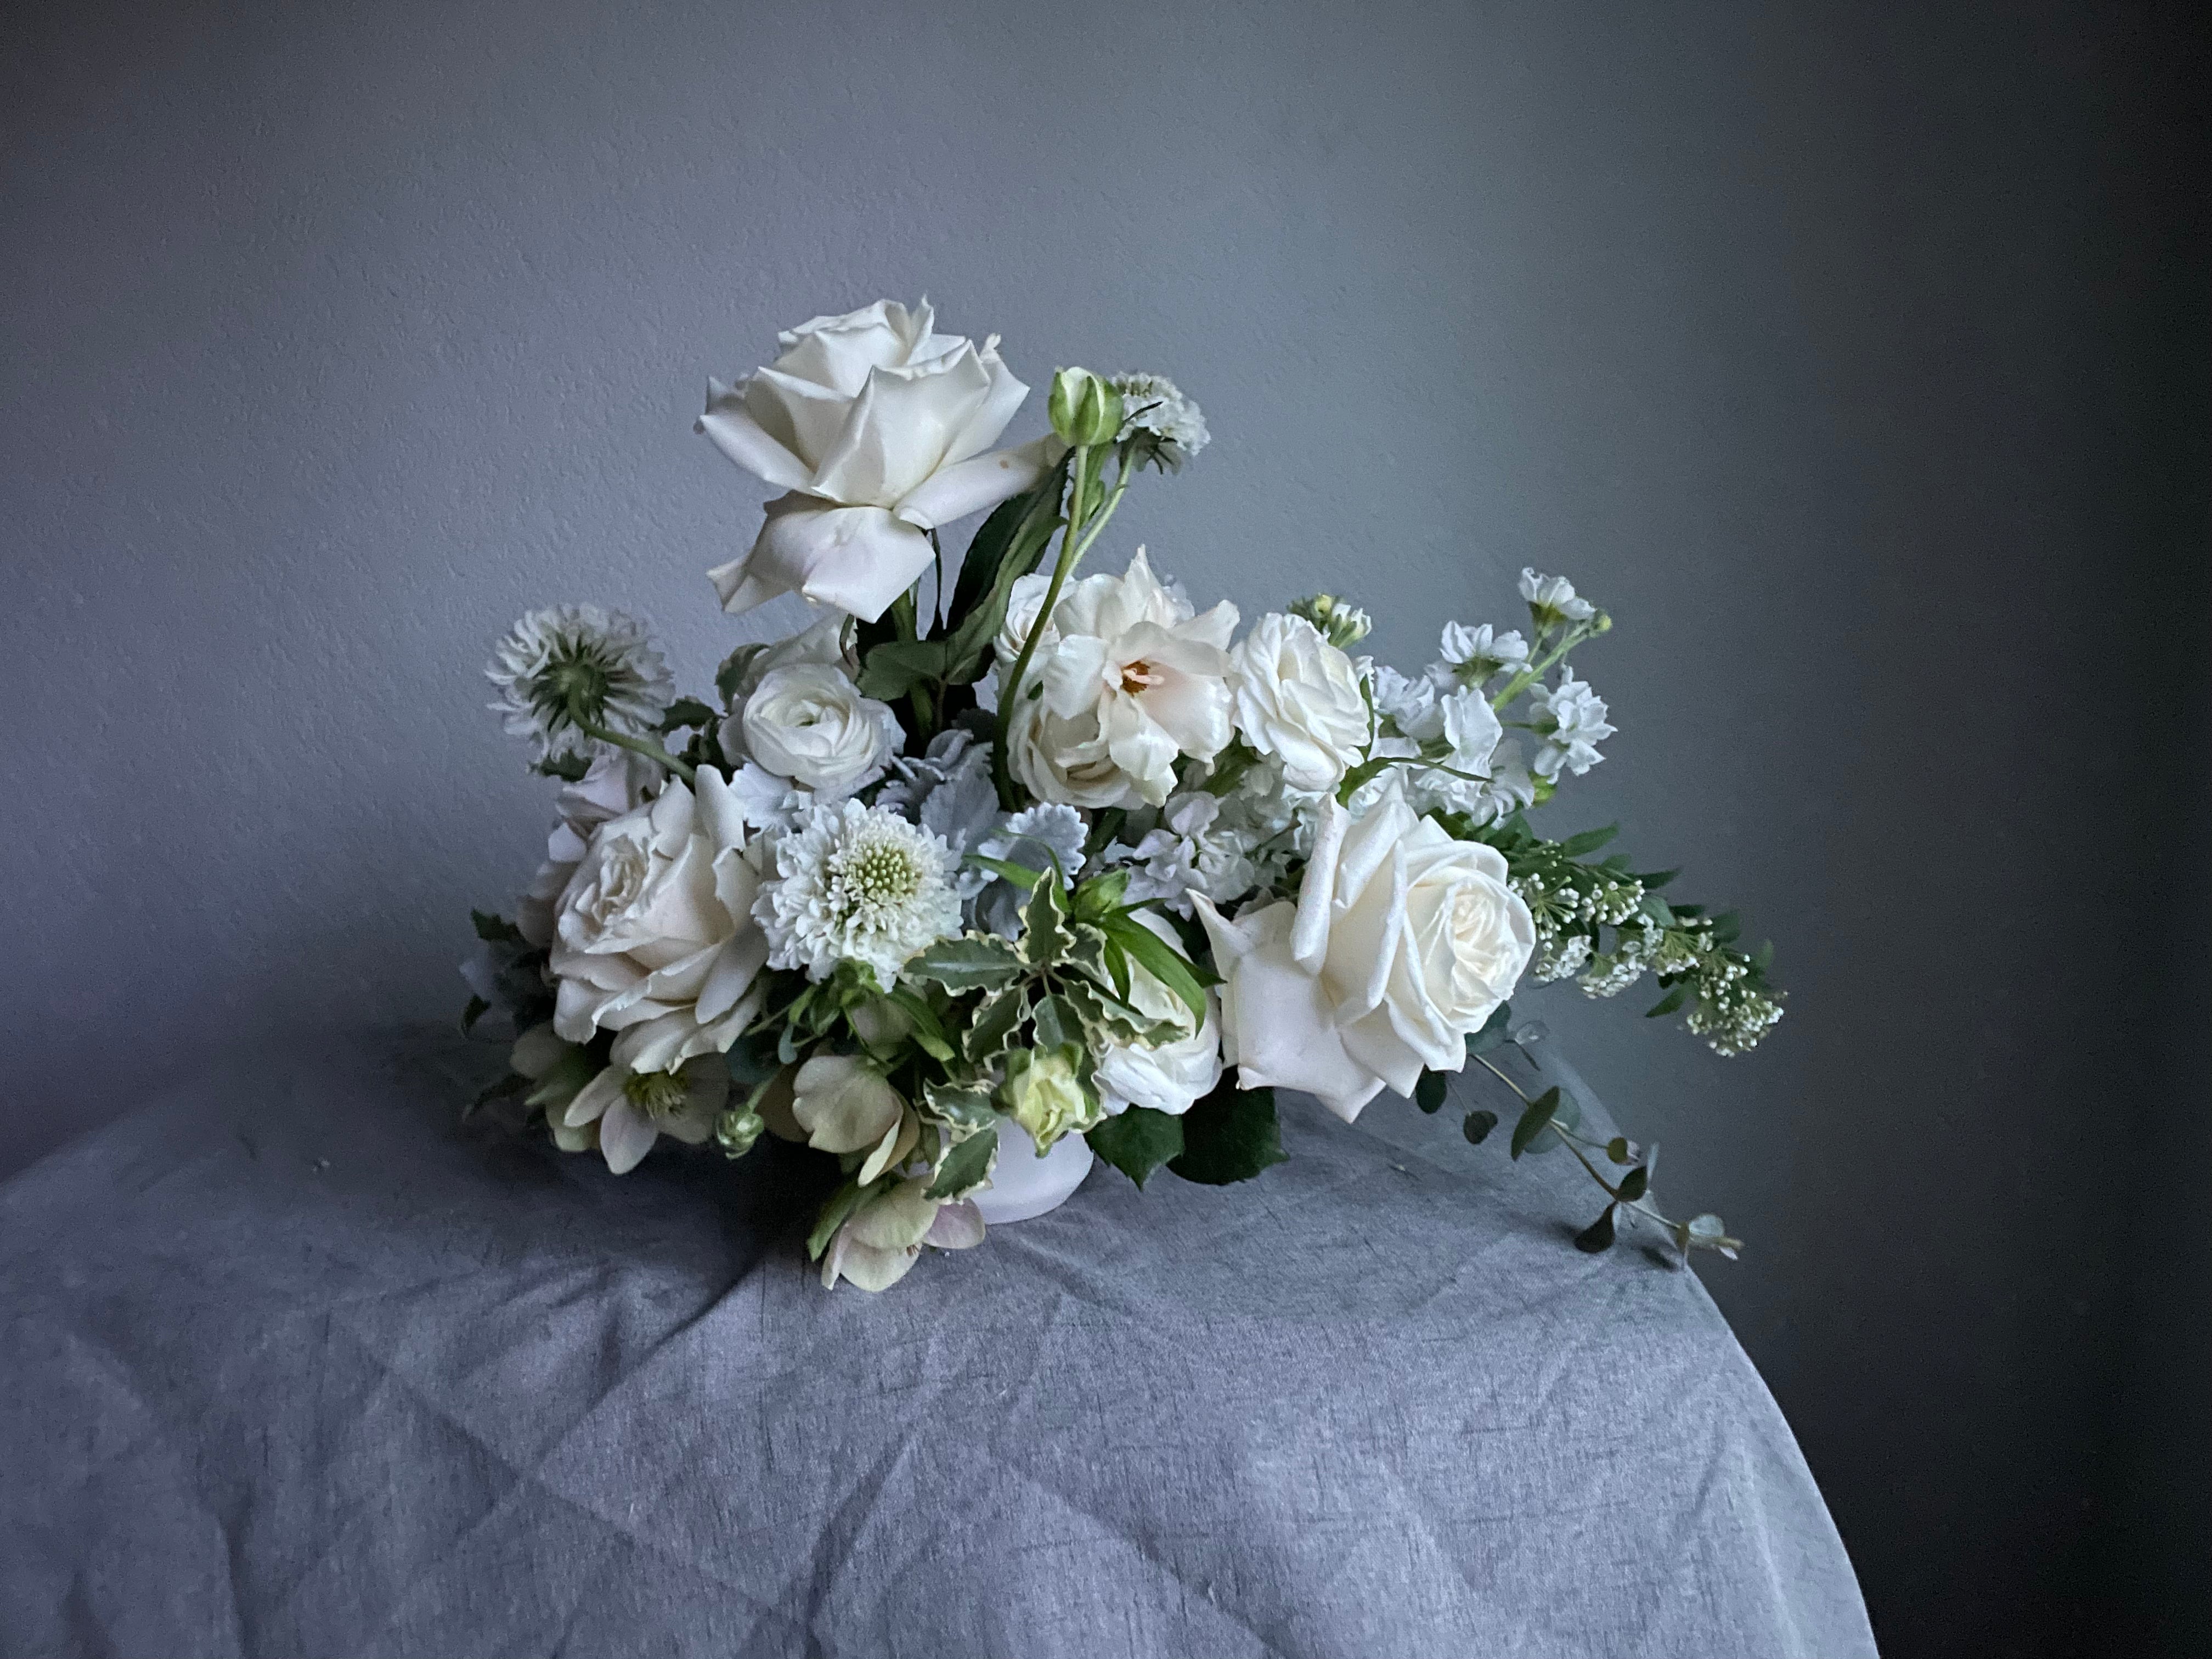 white and green vase arrangement perfect for your wedding, elopement or celebration